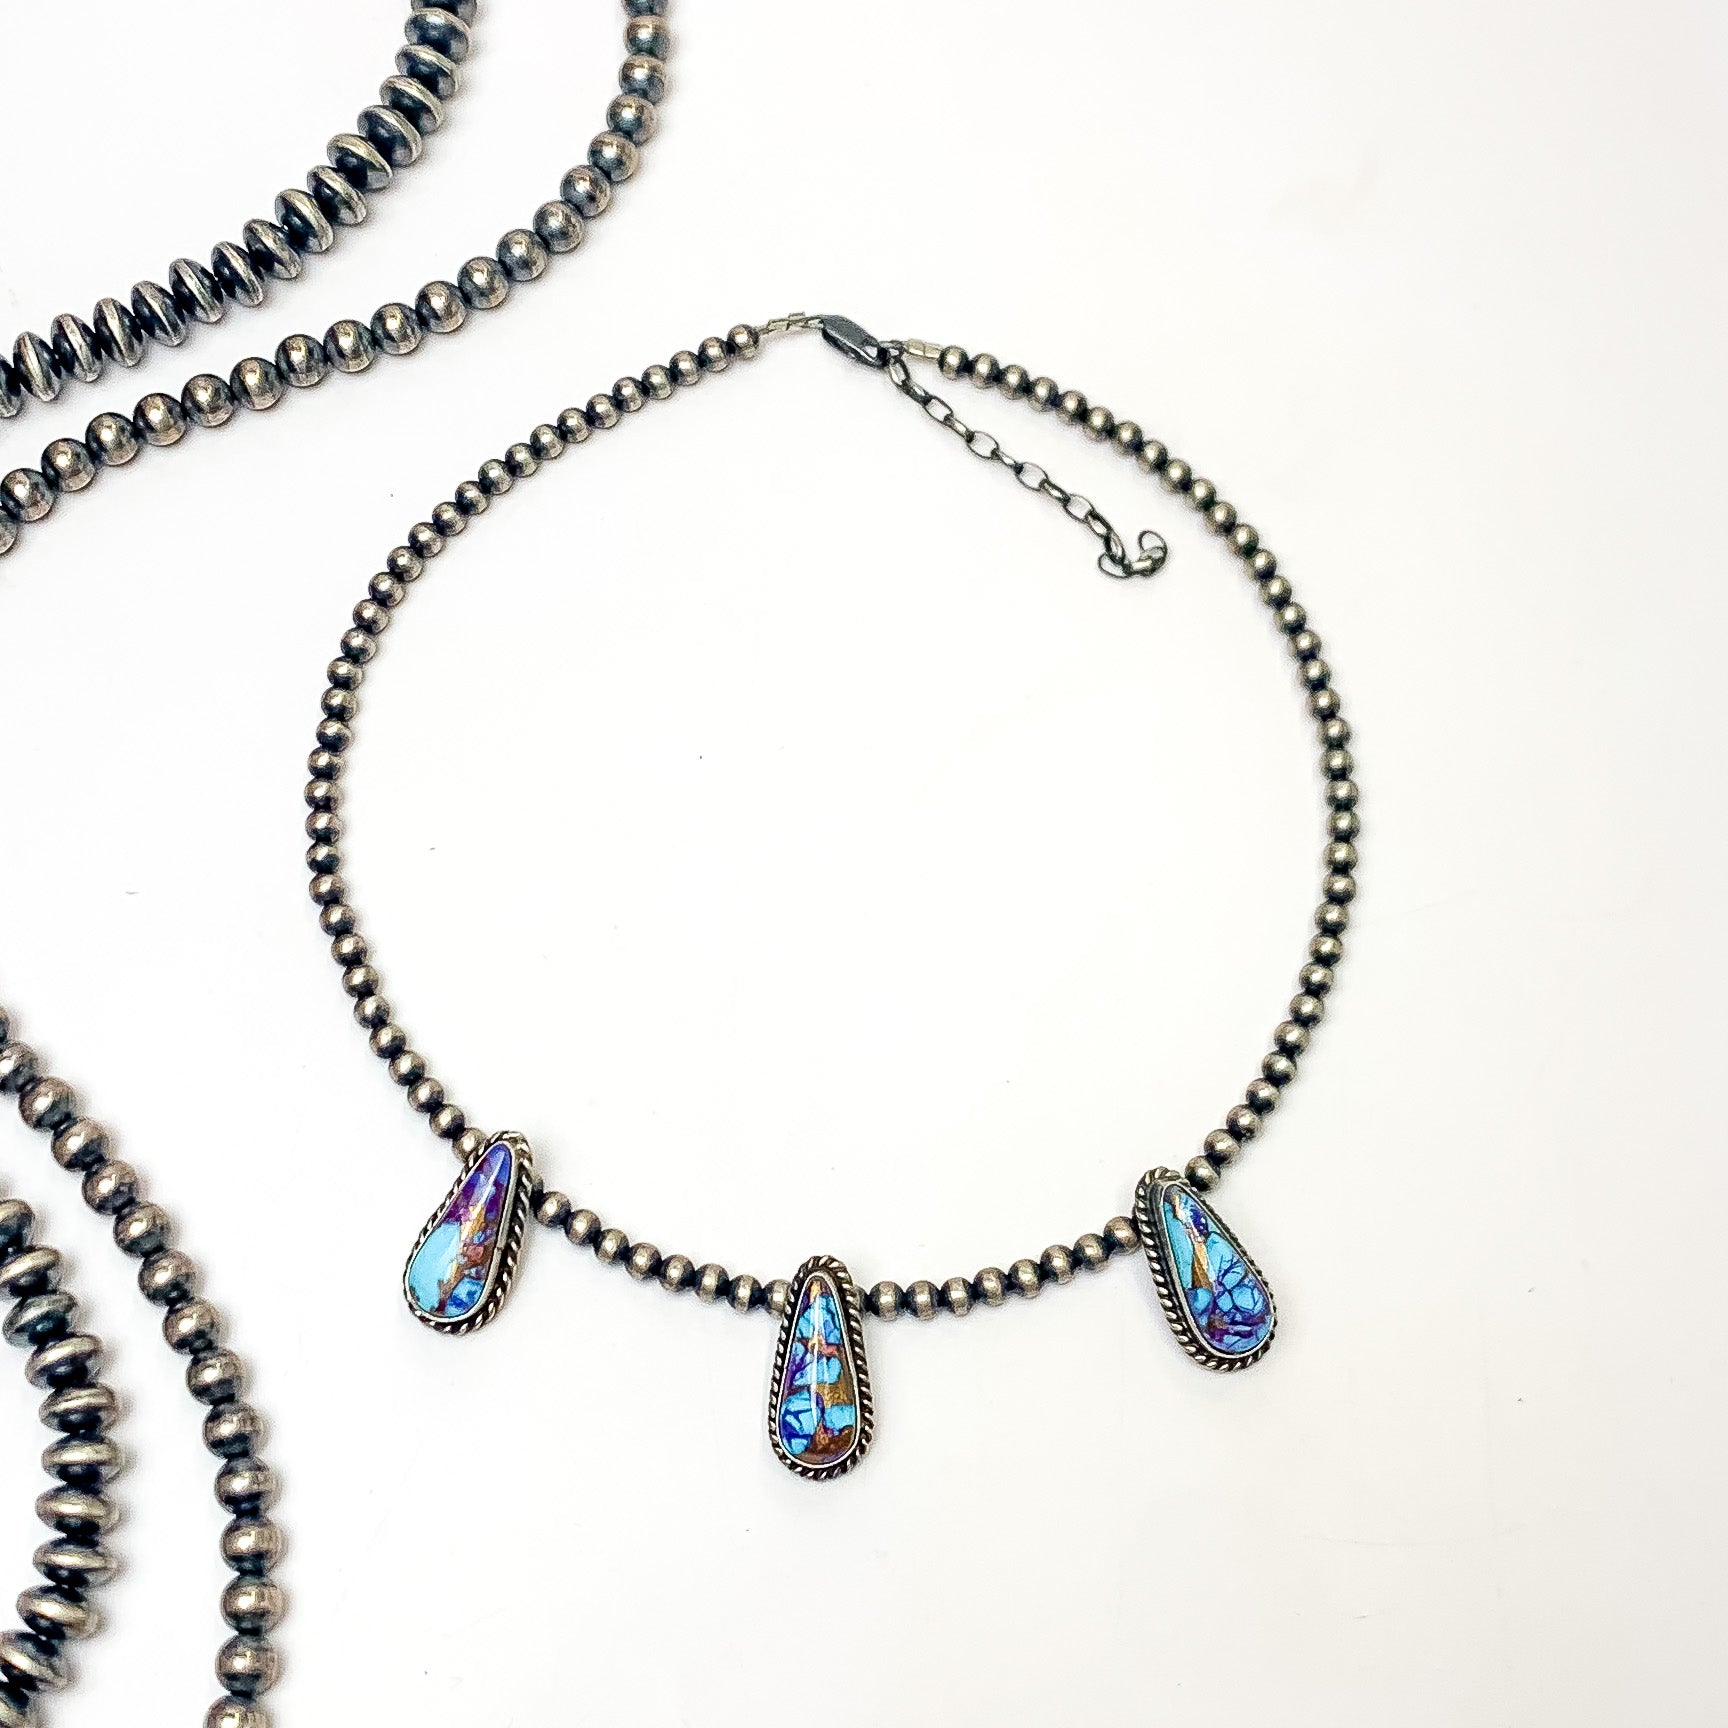 Pictured is a silver pearl beaded necklace with three teardrop stones. These stones are mojave turquoise remix stones. This necklace is pictured on a white background with silver beads on the left side. 